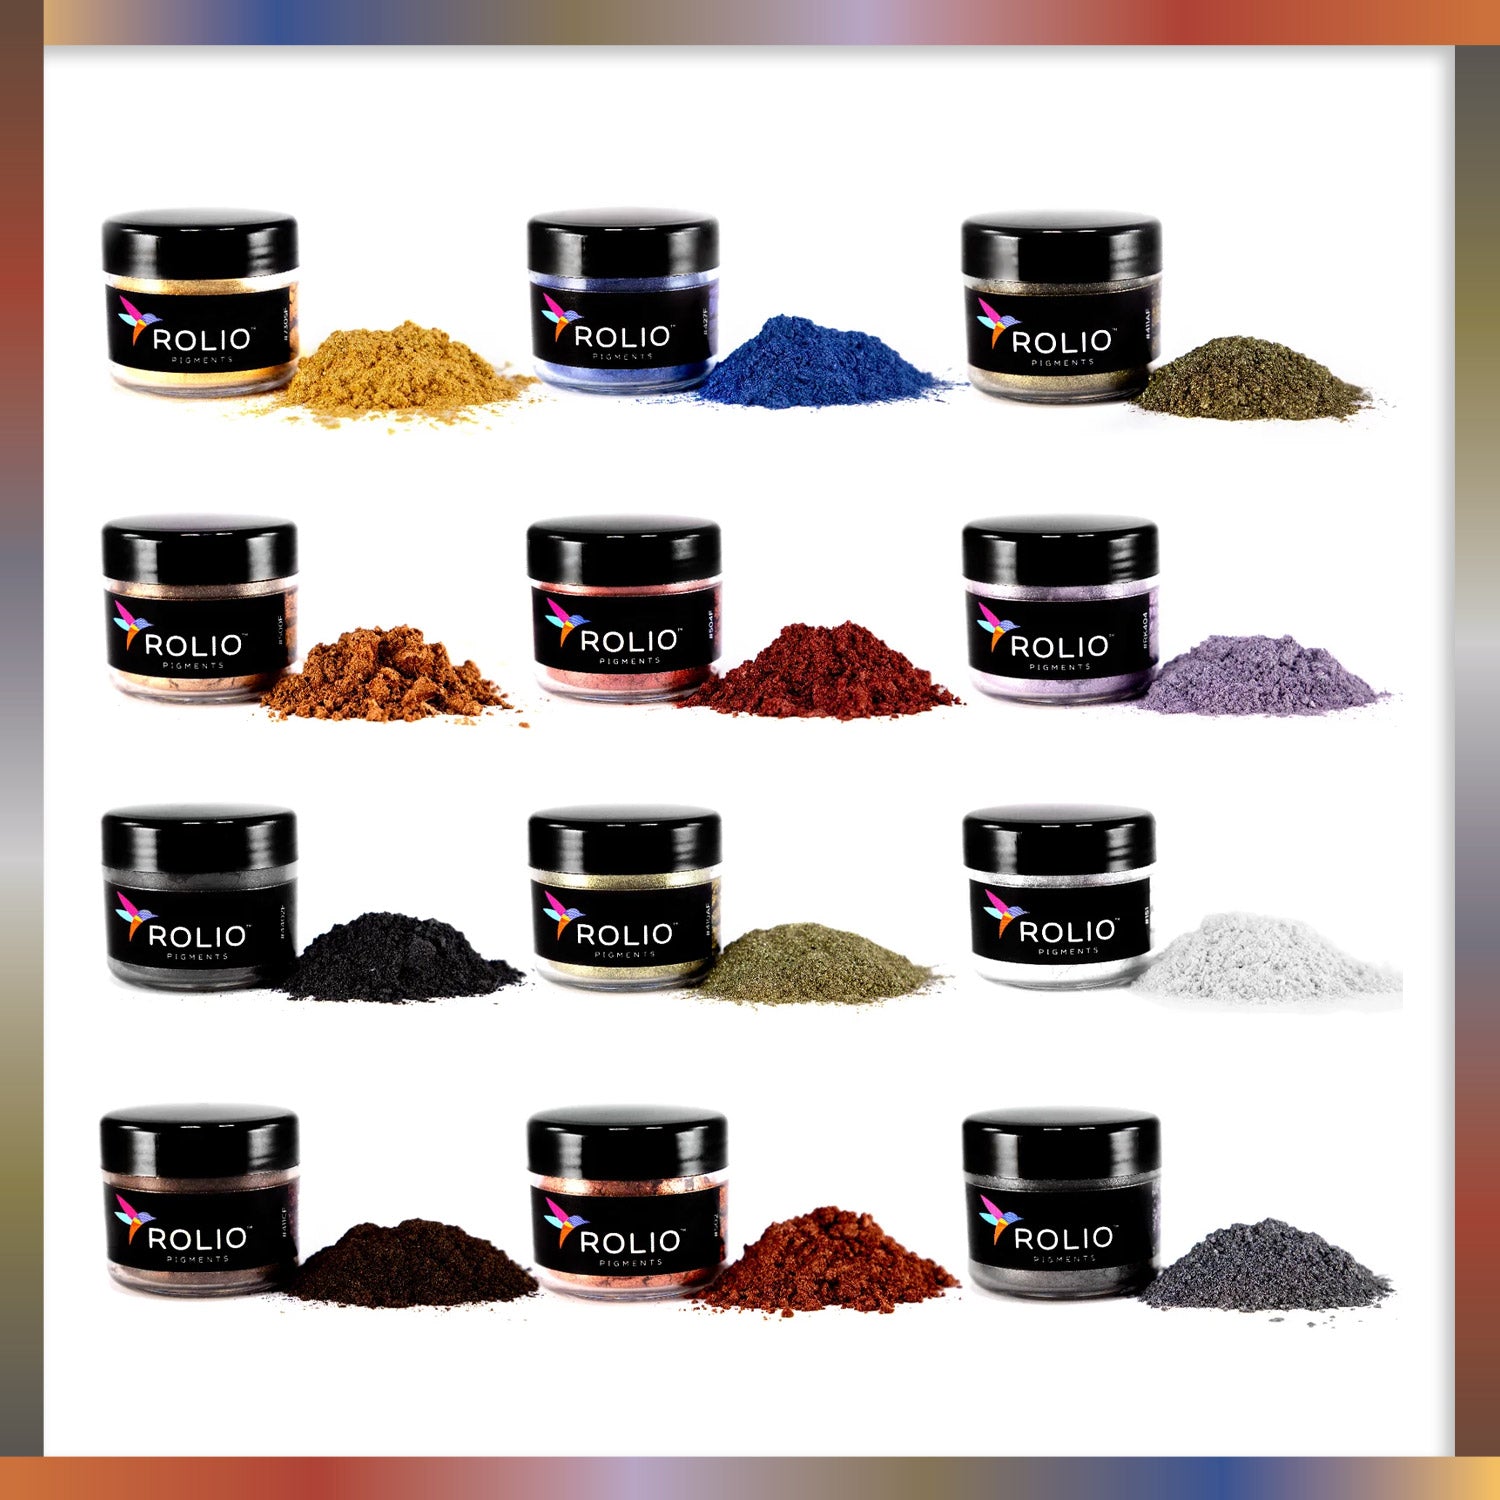 Red Shimmer Mica Powder - Range Products